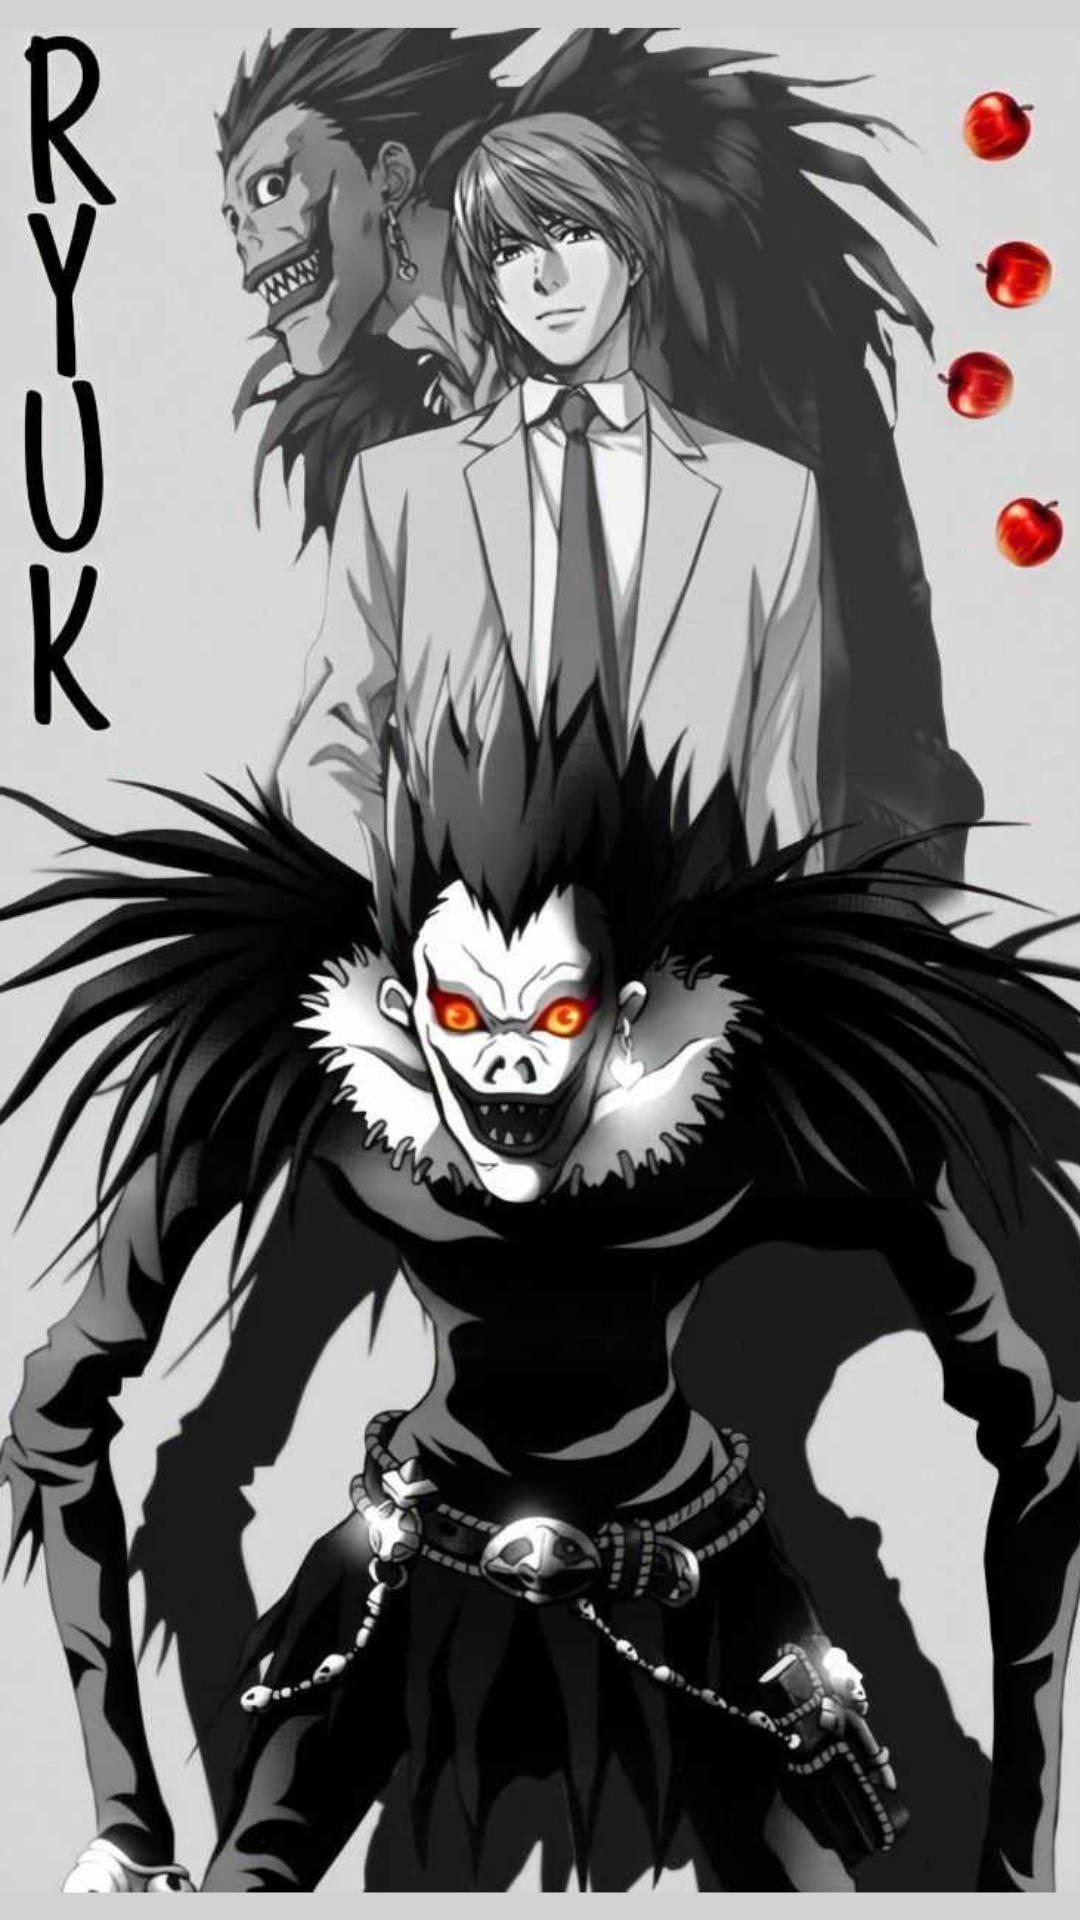 Free Death Note iPhone Wallpaper Downloads, Death Note iPhone Wallpaper for FREE